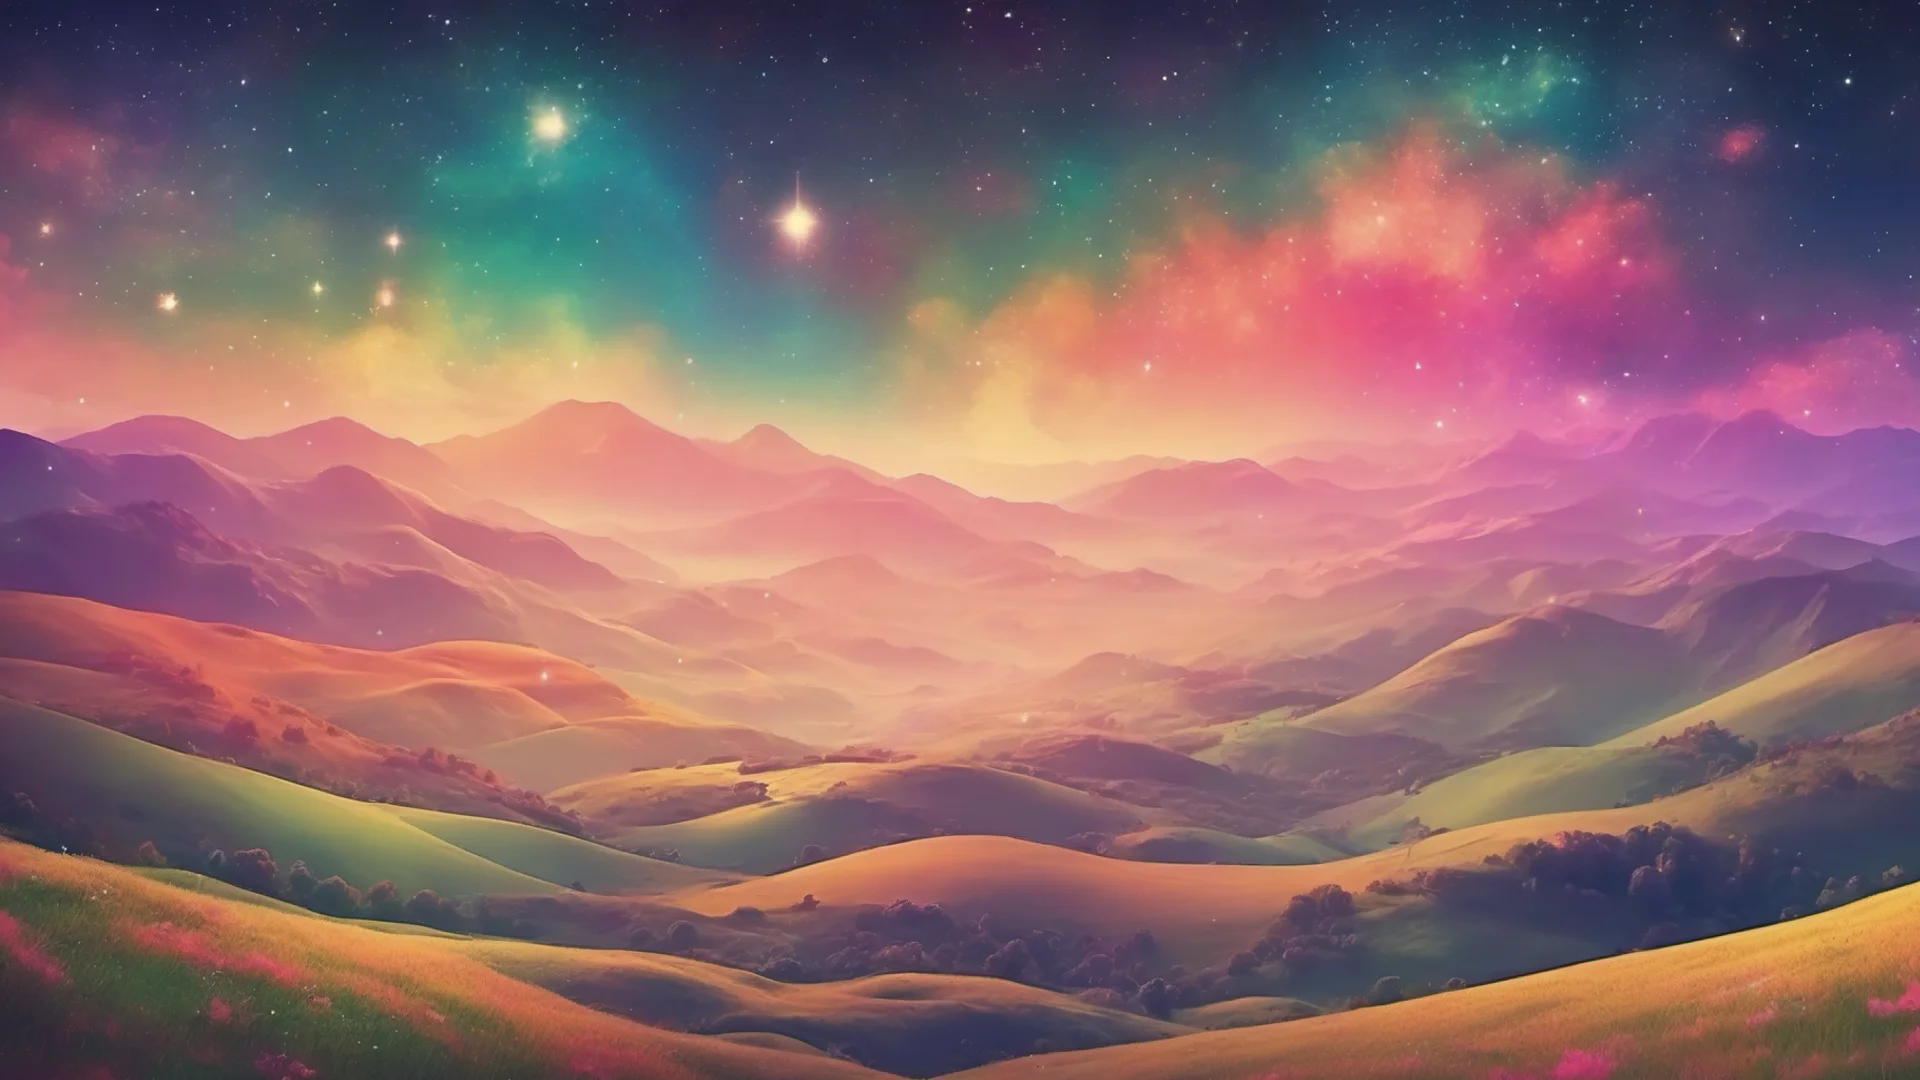 amazing background gentle rolling hills valleys colorful fantasy universe stars wide